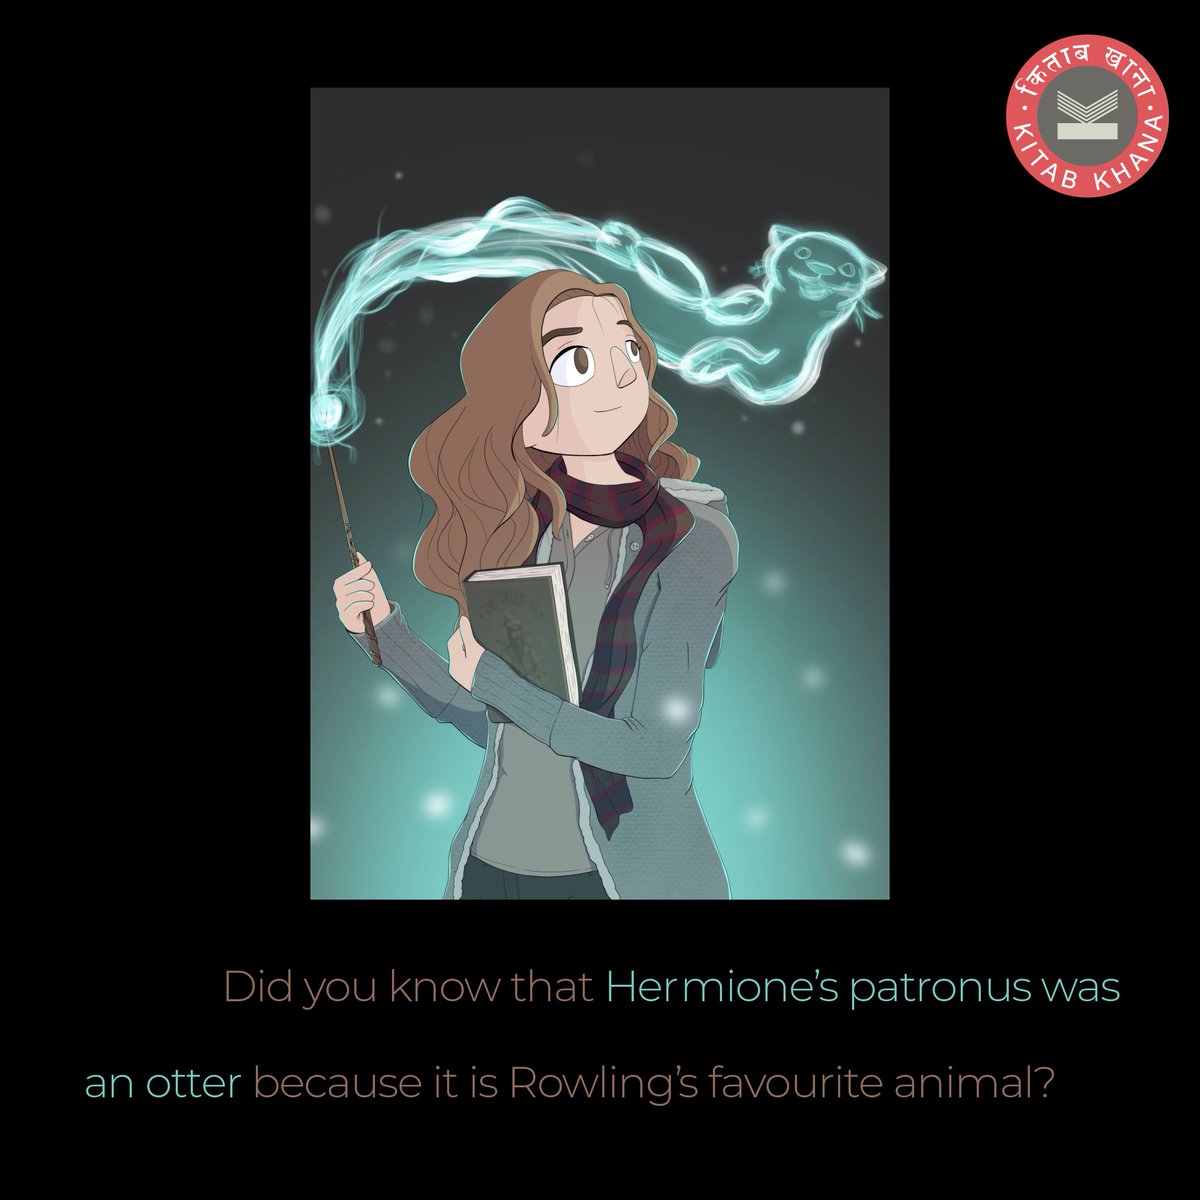 Here's celebrating one of the most-loved literary nerds, the awe-inspiring Gryffindor, Hermione Granger on her birthday, today! What's your favourite lore associated with Hermione? #hermionegranger #potterheads #potterverse #harrypotterseries #muggle #readmorebooks #kitabkhana